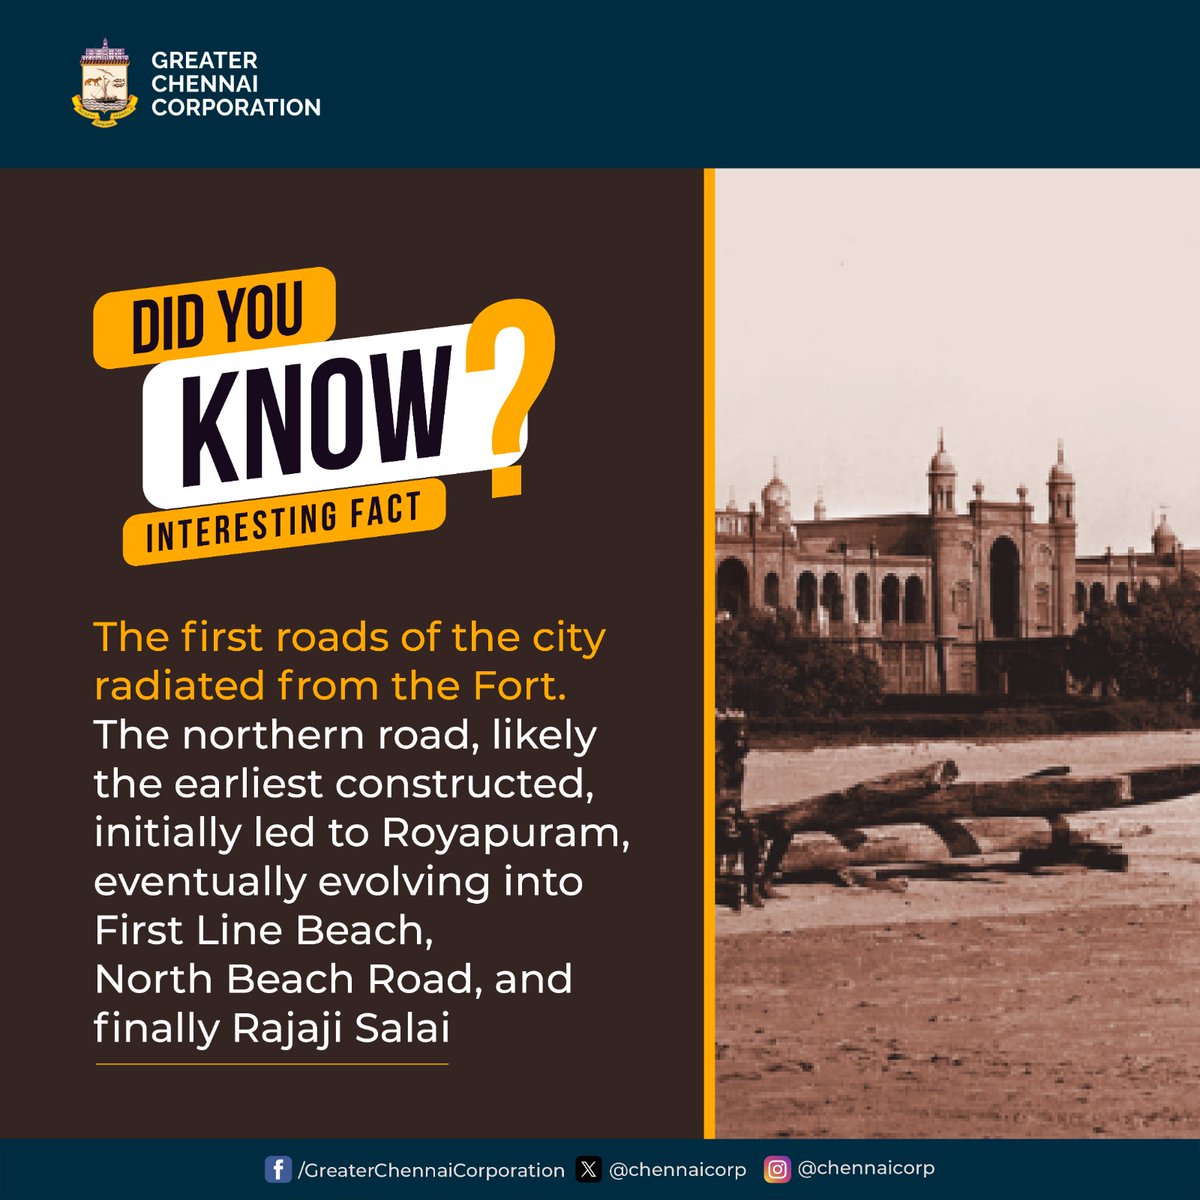 Did you know? Chennai's first roads radiated from the Fort. The northern road, initially leading to Royapuram, evolved into First Line Beach, North Beach Road, and finally Rajaji Salai. @RAKRI1 #ChennaiCorporation #HereToServe